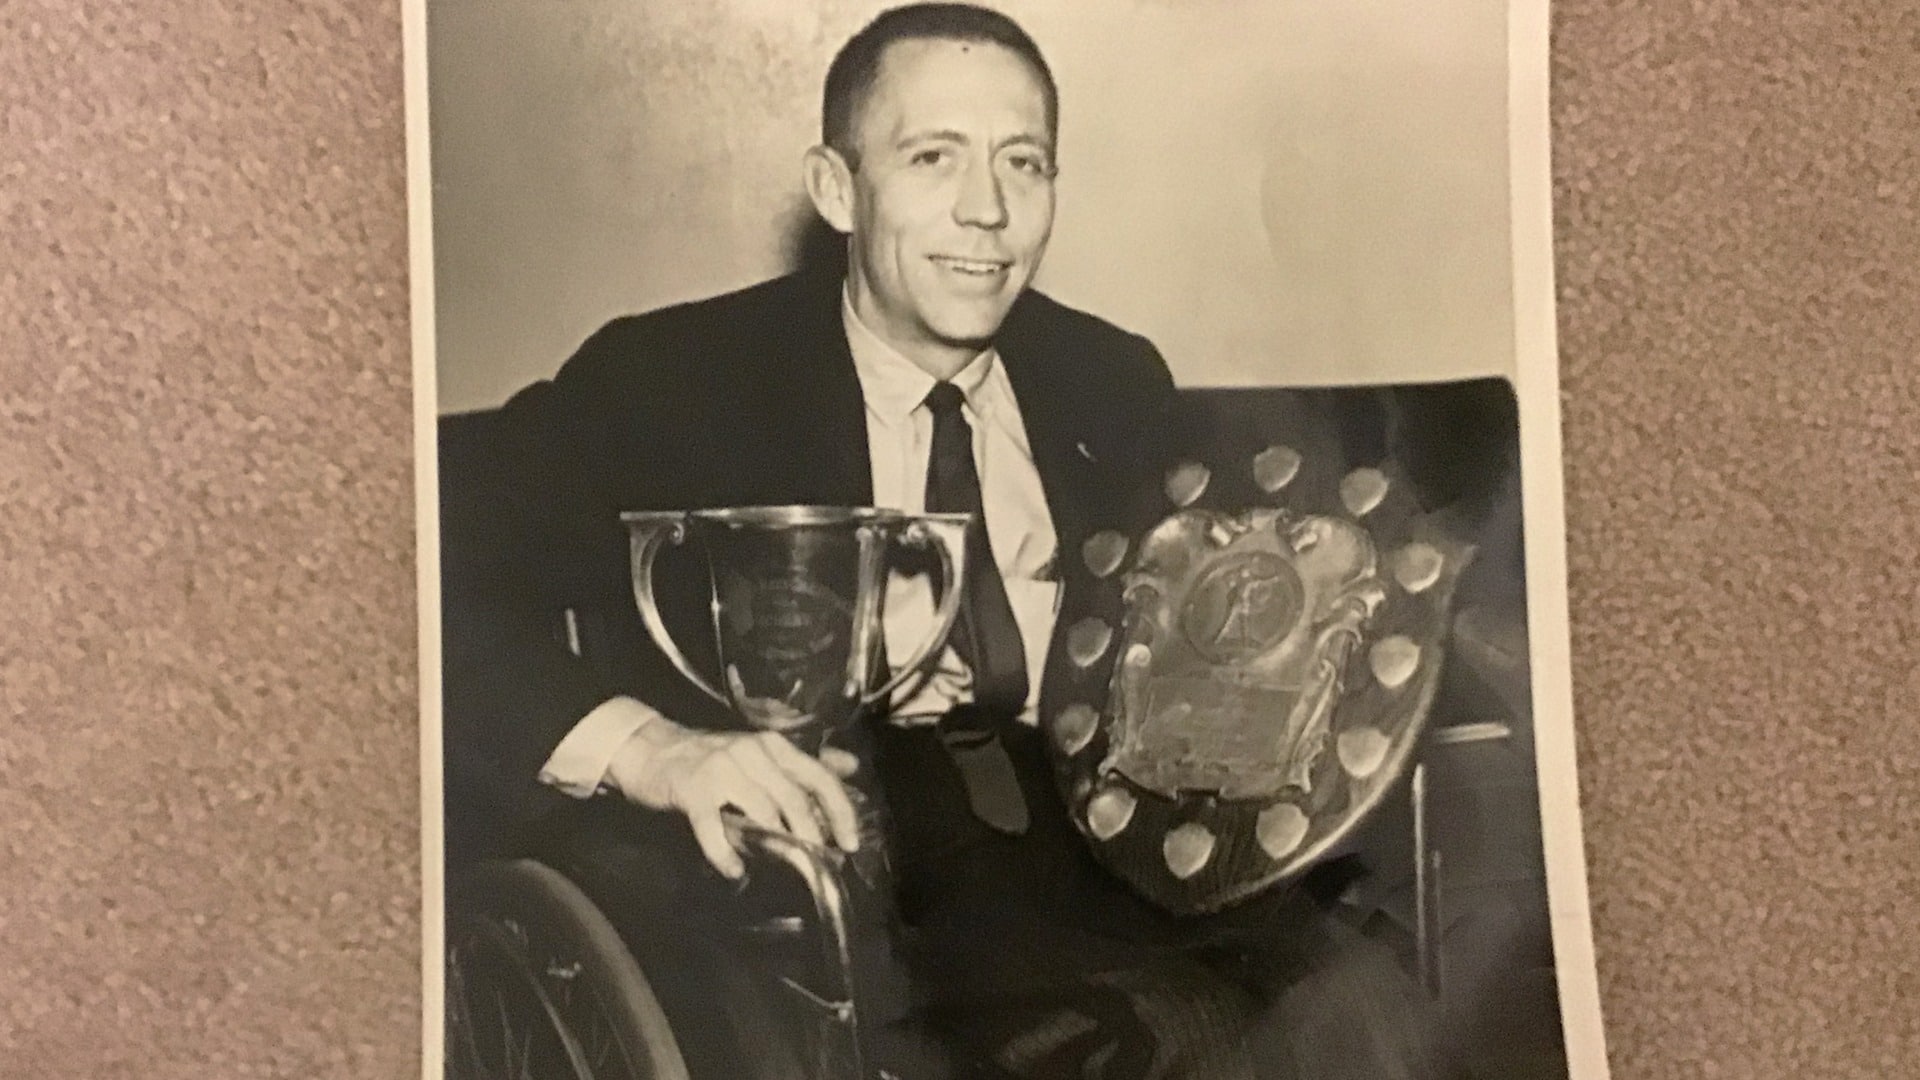 Jack Whitman poses with trophies